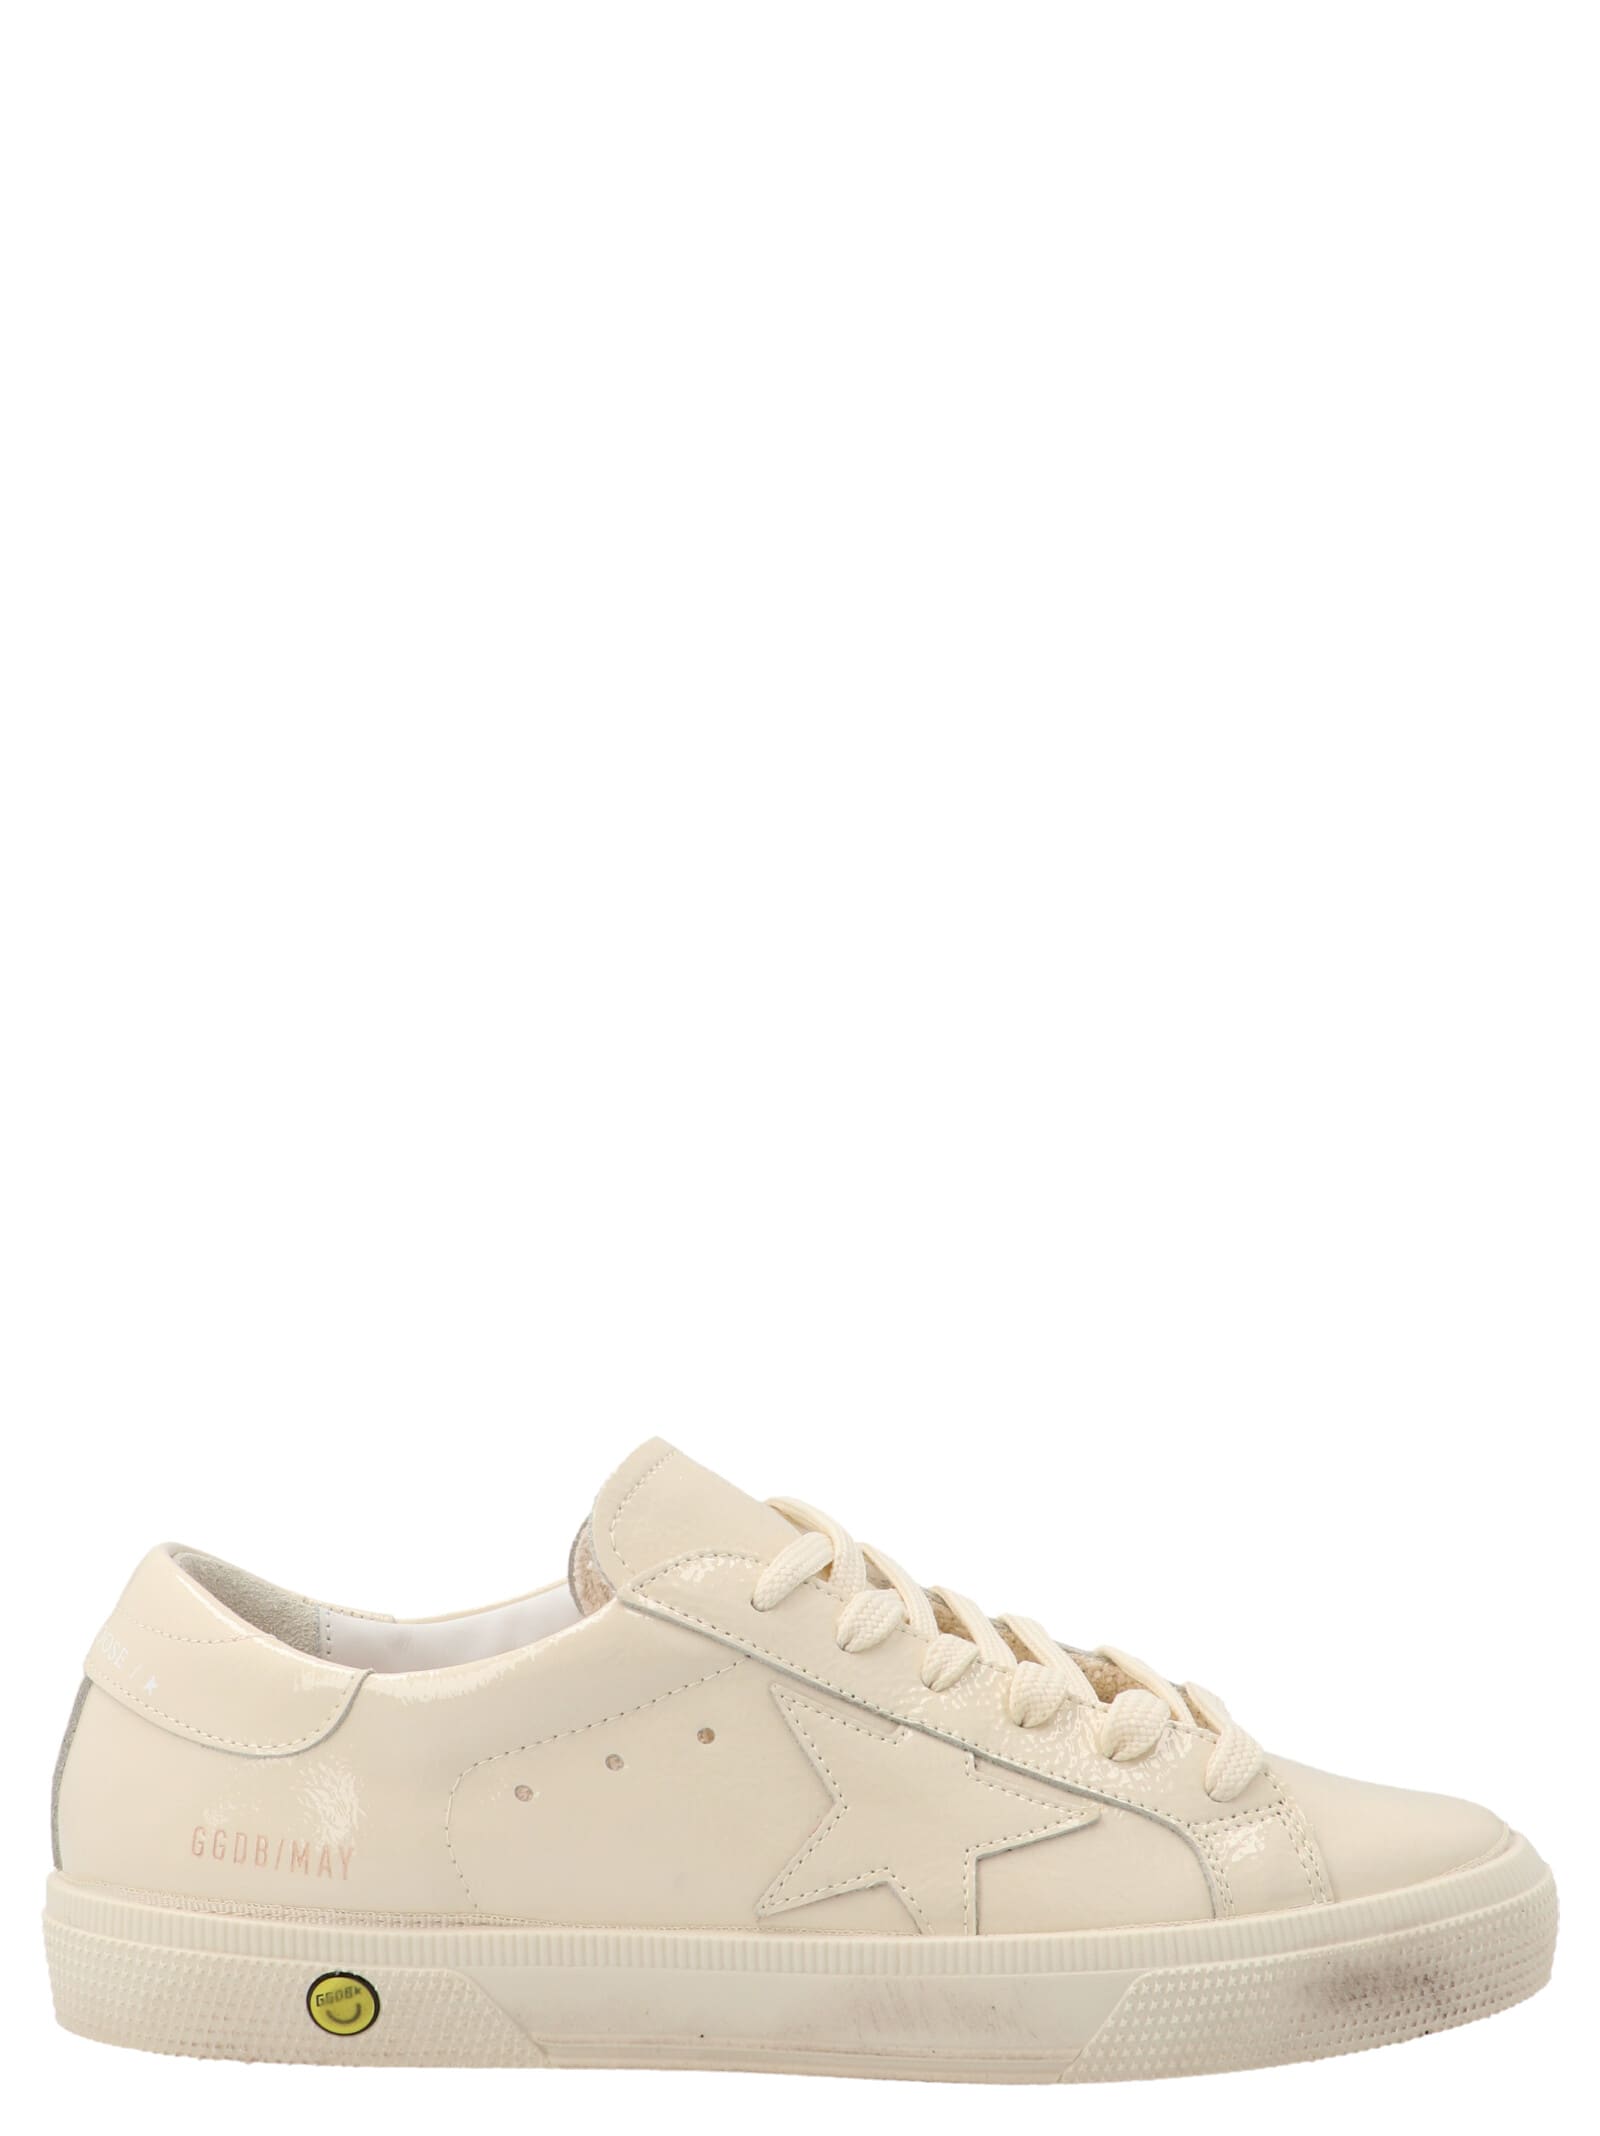 Golden Goose Kids' May Shoes In White